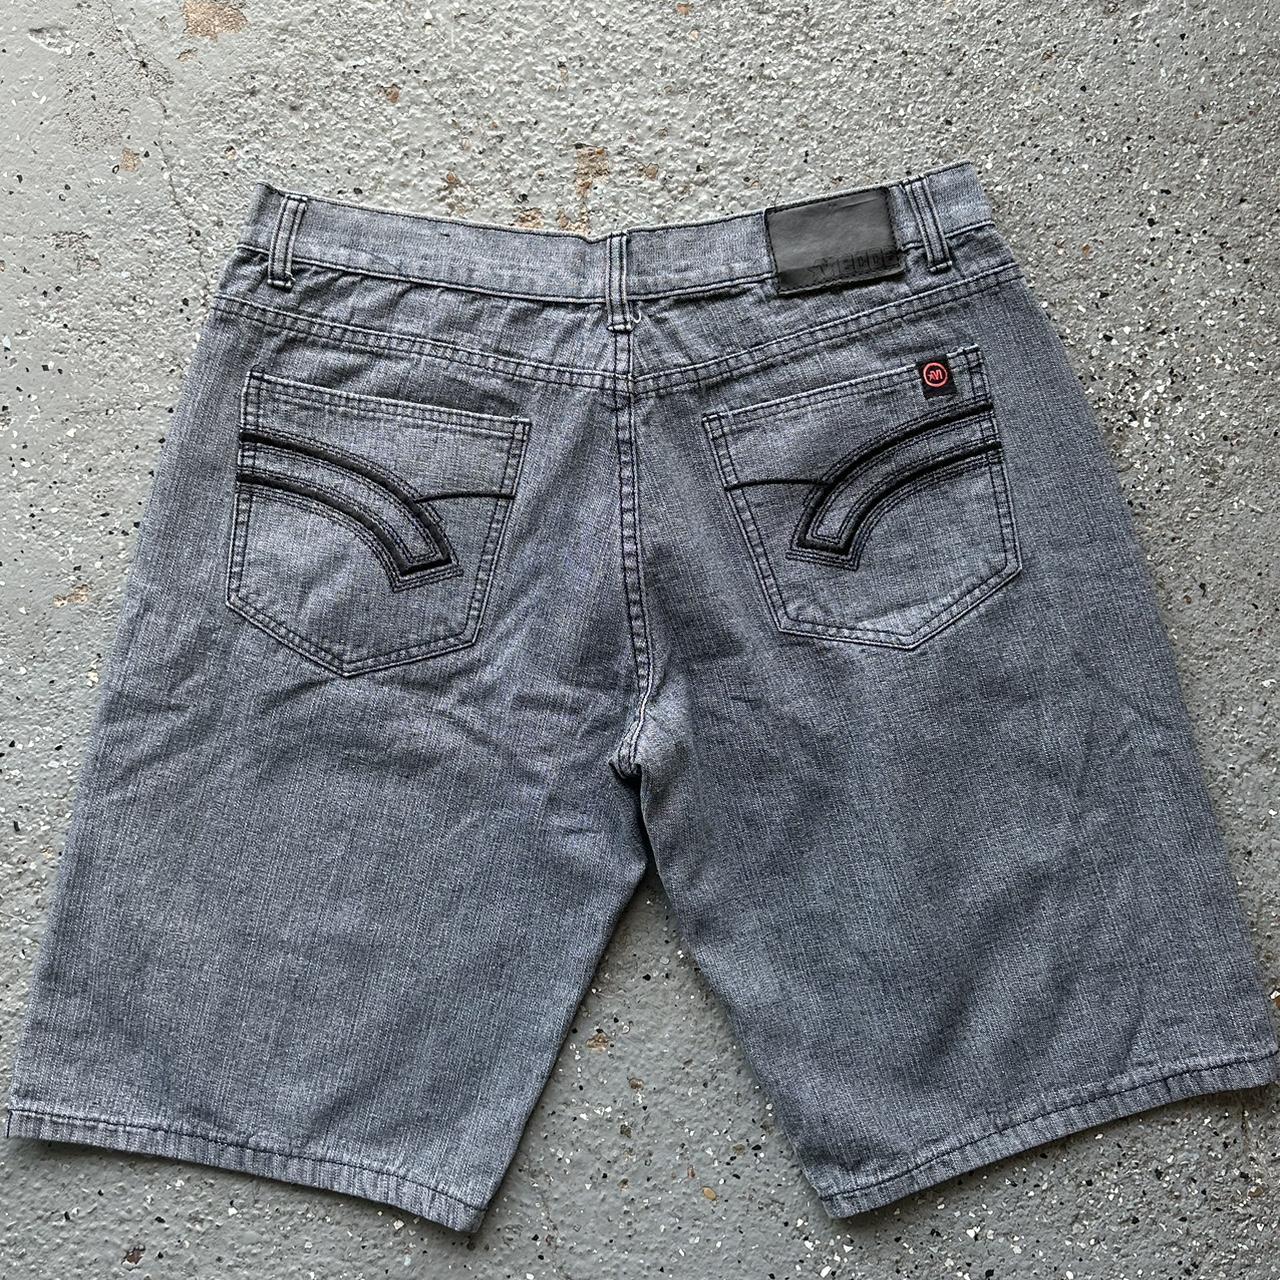 vintage Mecca 90s grunge style baggy jorts!! these... - Depop